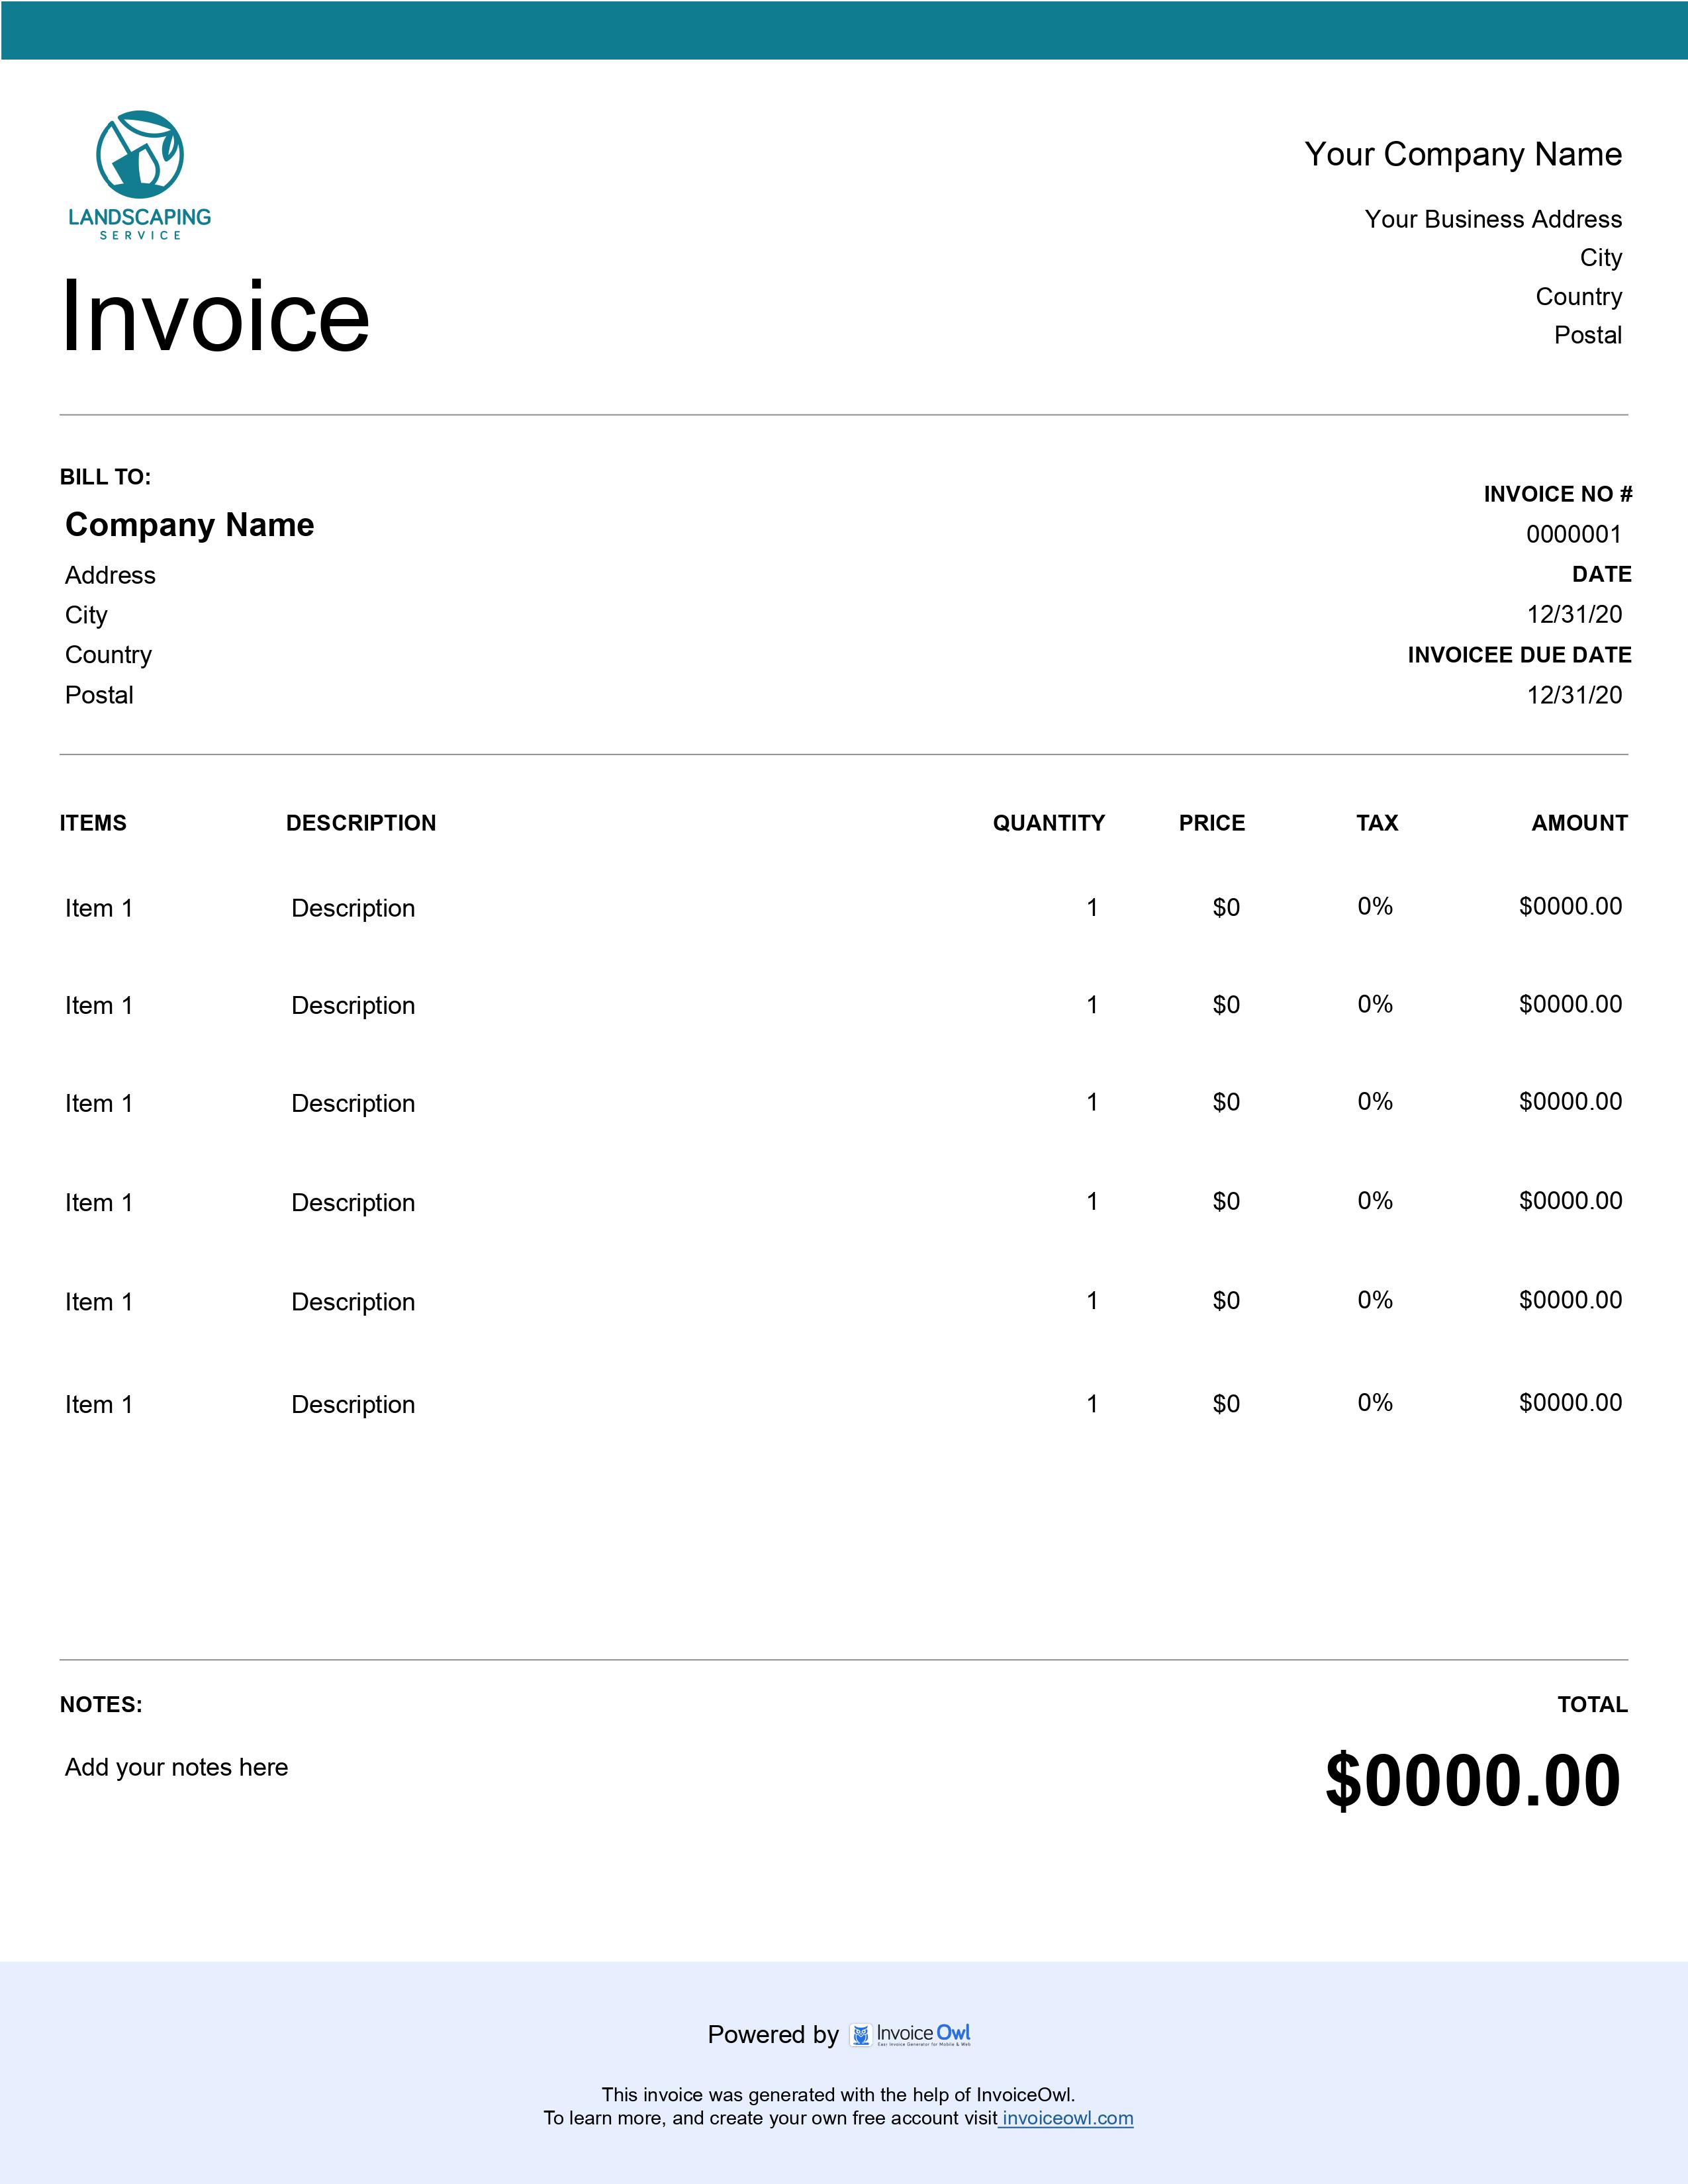 Lawn aeration services business invoice template